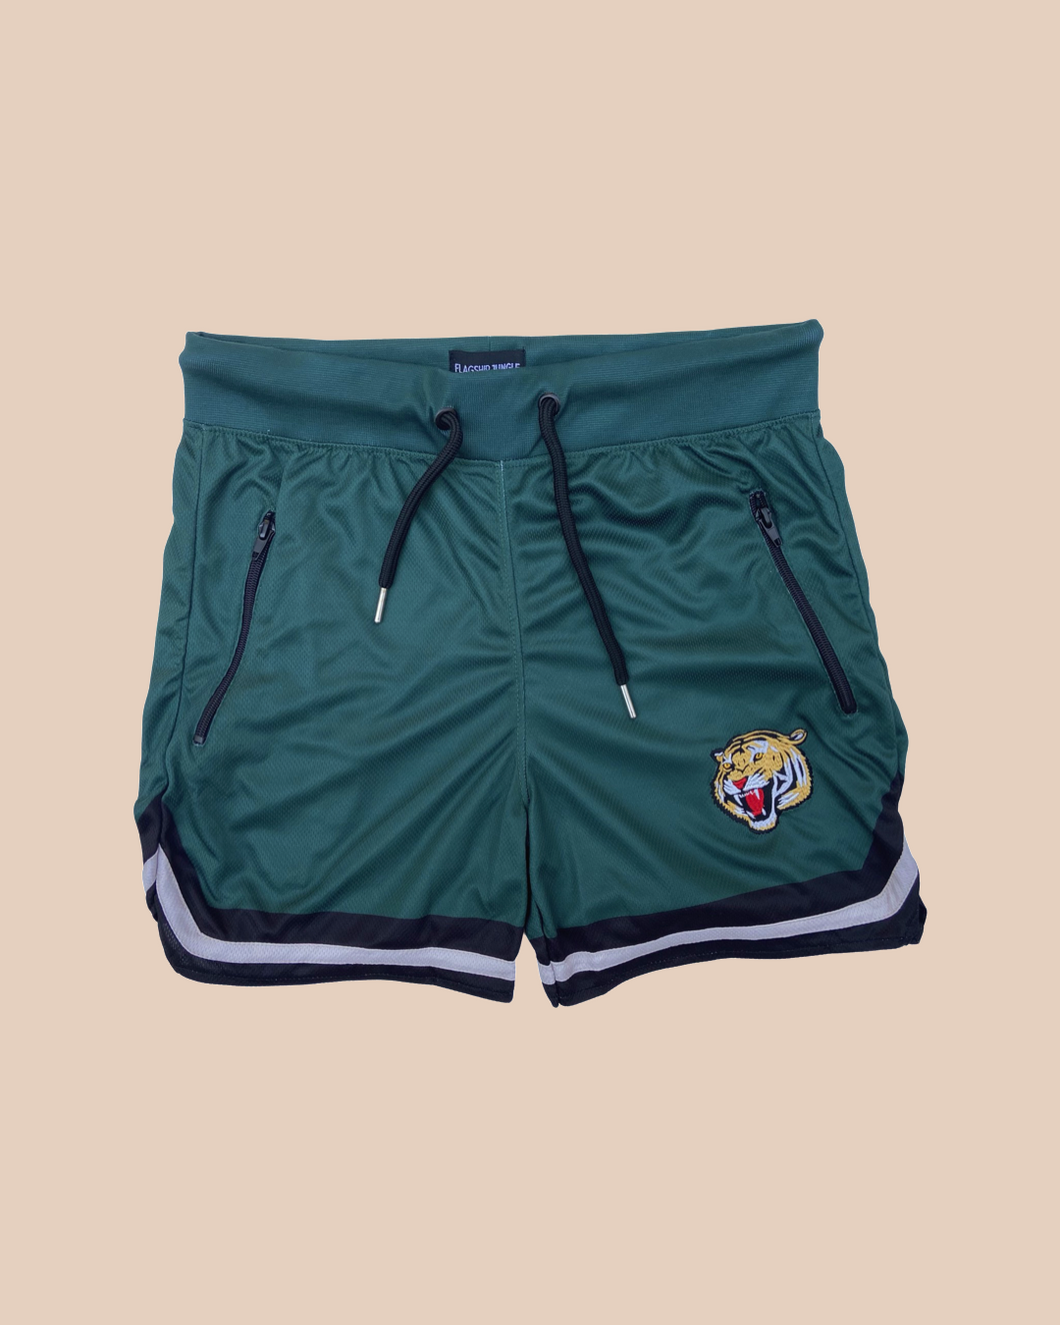 Undefeated Men Authentic Basketball Shorts teal green